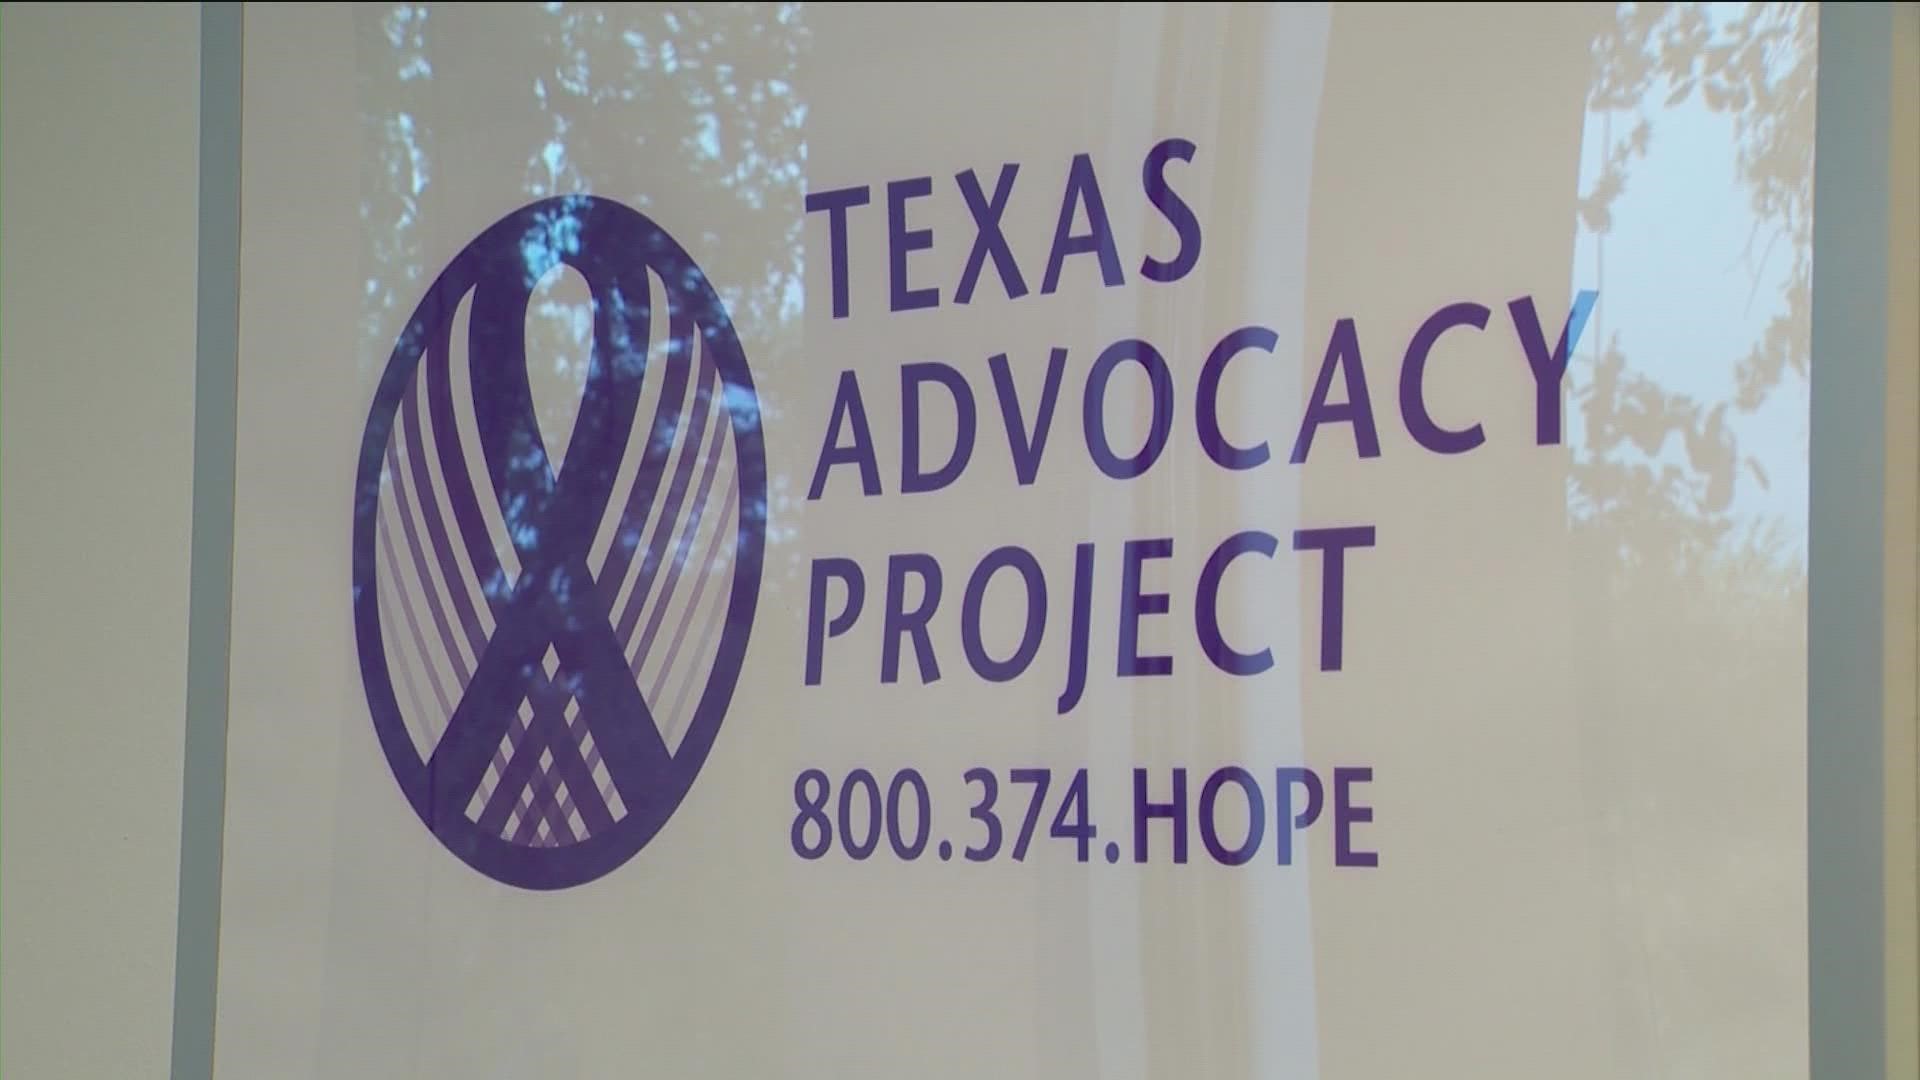 TAP helps survivors of domestic violence have access to legal services and representation for free across the State of Texas.